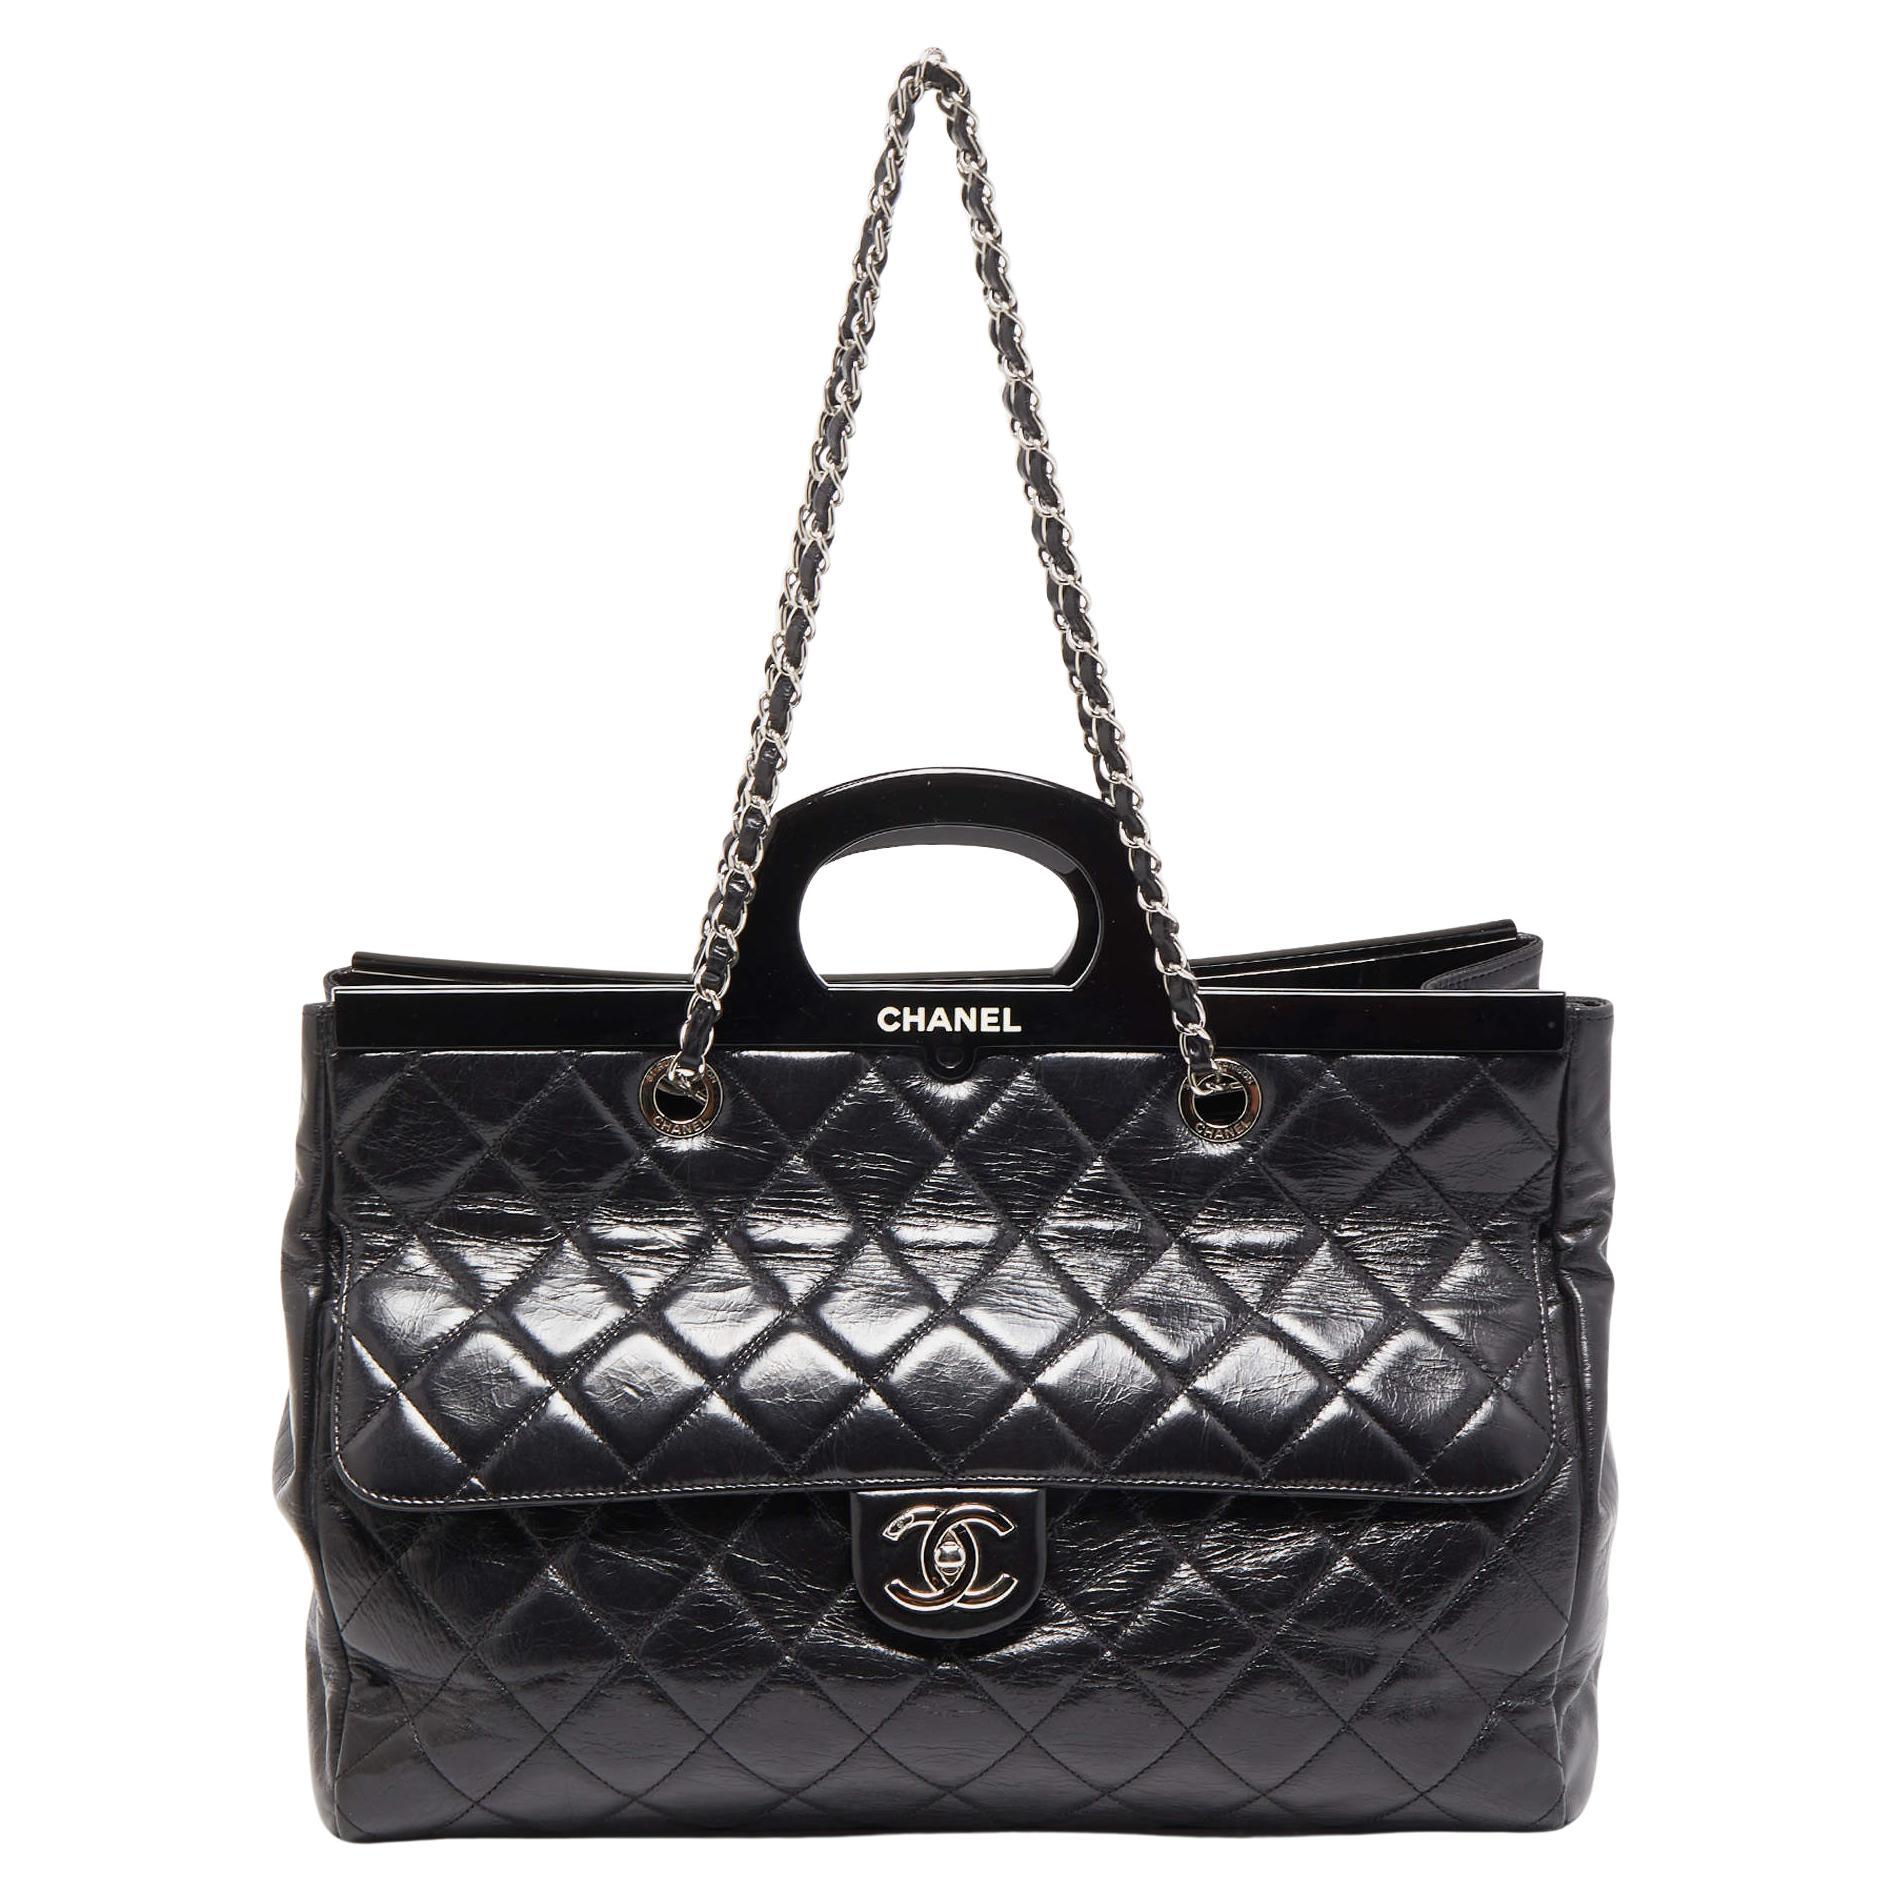 Chanel Black Quilted Glazed Leather Large CC Delivery Tote